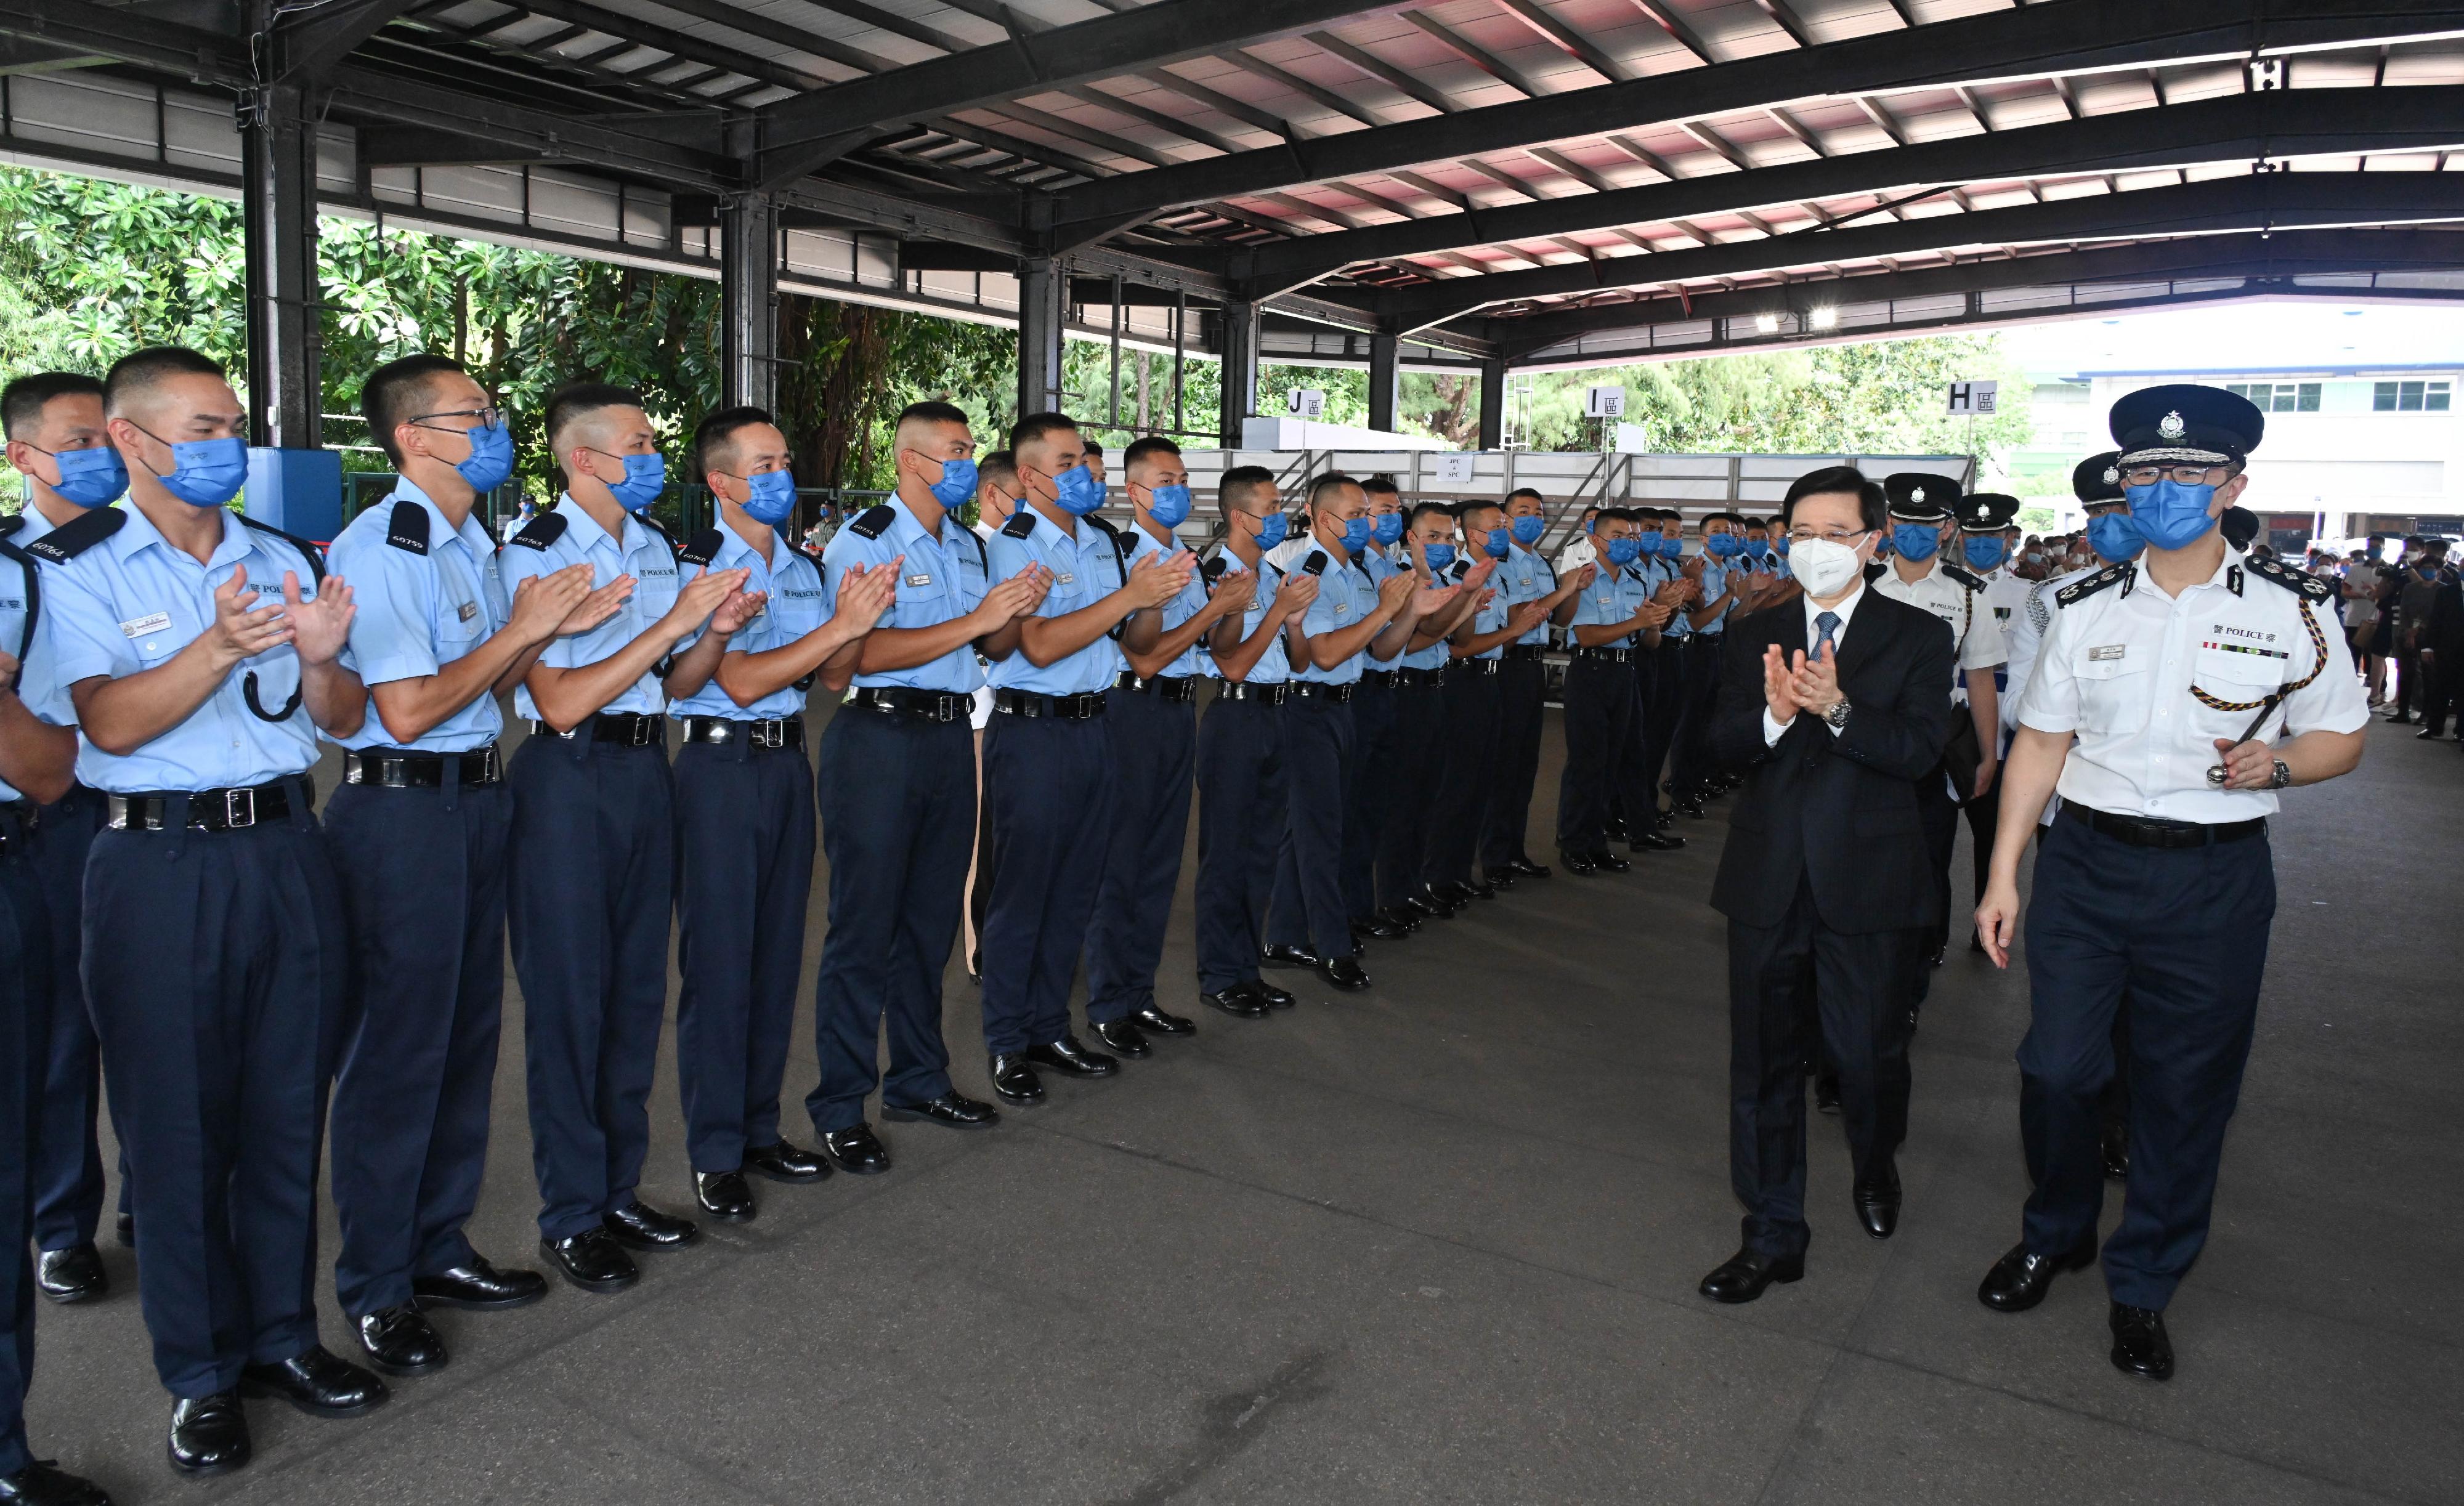 The Chief Executive, Mr John Lee (second right), accompanied by the Commissioner of Police, Mr Siu Chak-yee (first right), meets graduates after the passing-out parade held at the Hong Kong Police College today (July 9).